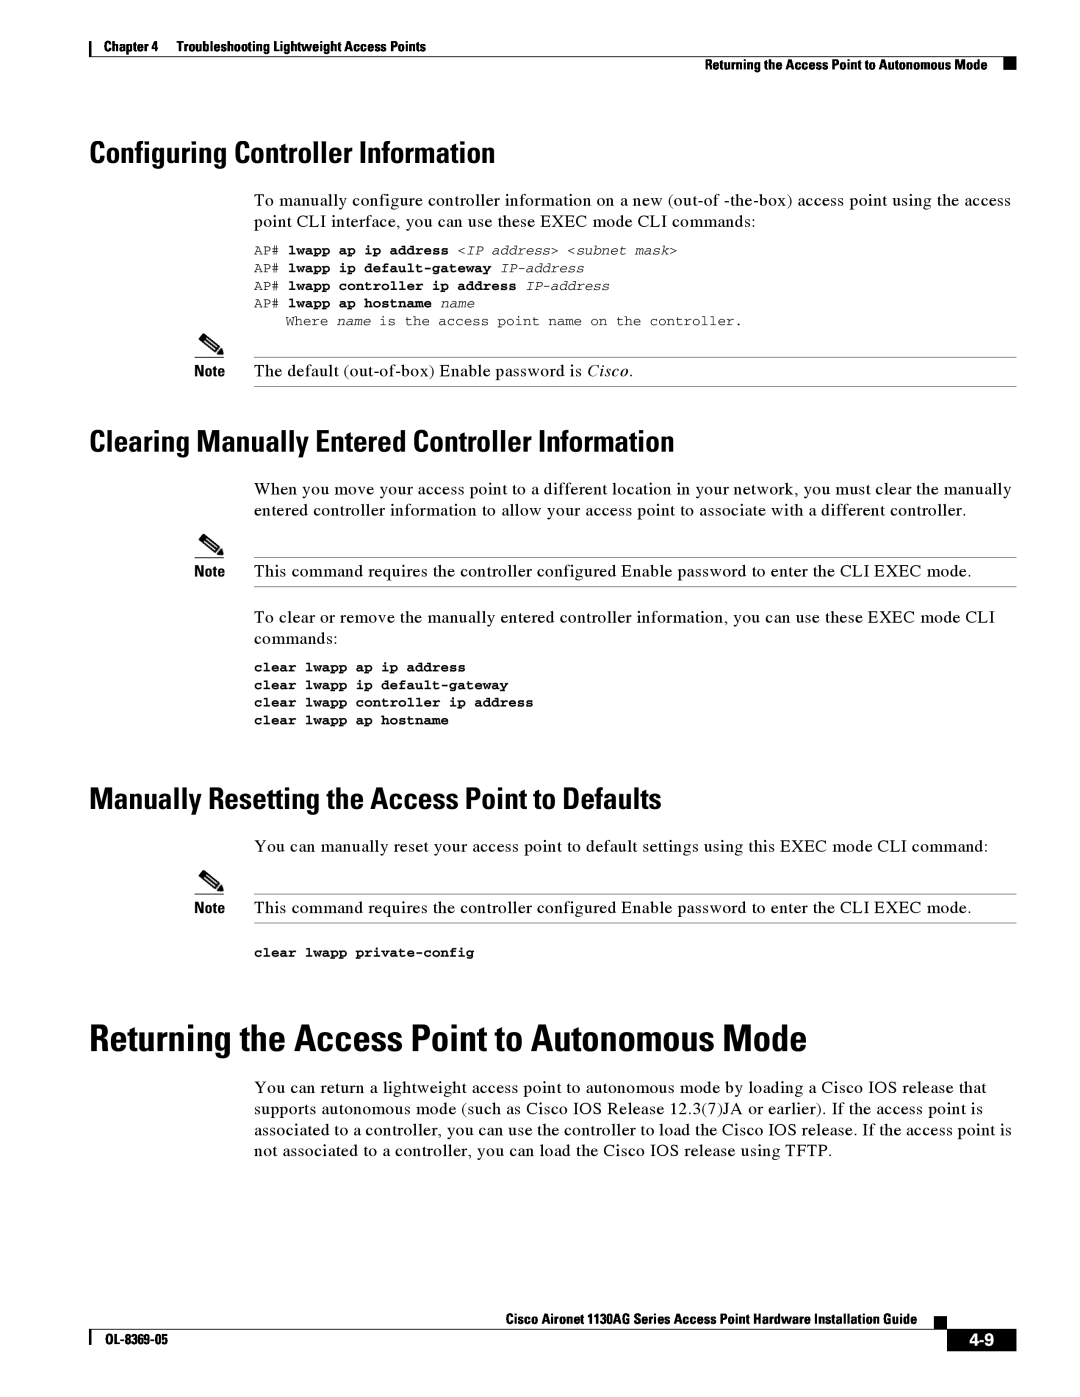 Cisco Systems 1130AG manual Returning the Access Point to Autonomous Mode, Configuring Controller Information 